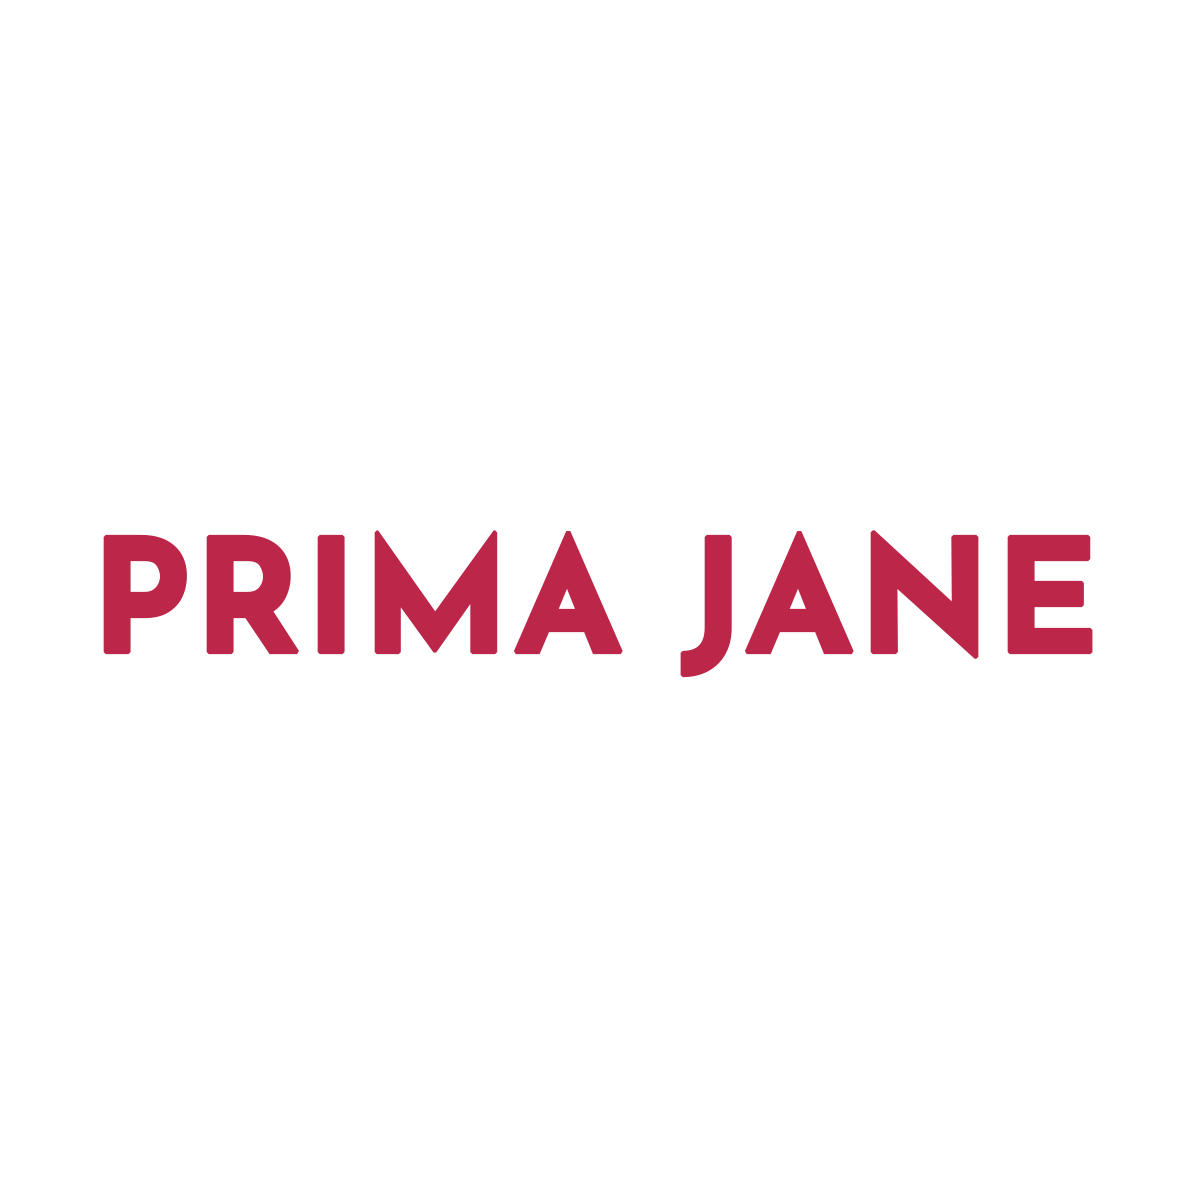 Home - Prima Jane - Women Clothing Shoes Handbags and Fashion Accessories